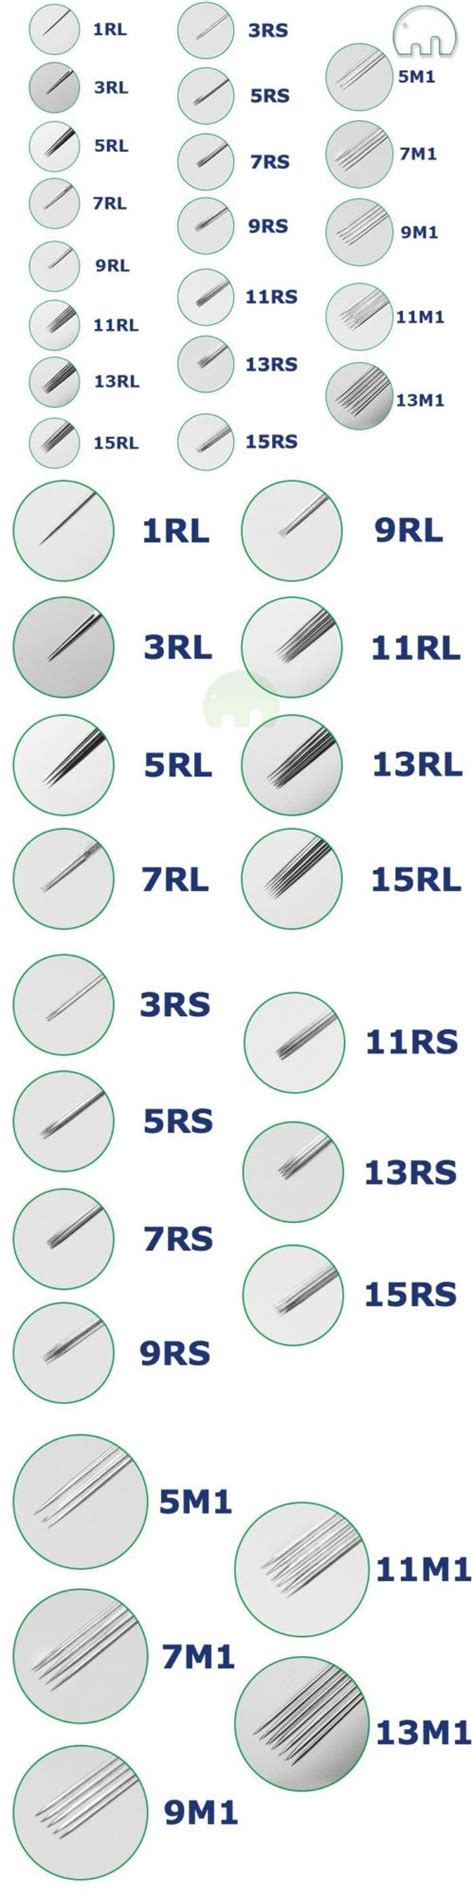 Tattoo Needle Sizes For Stick And Poke Best Tattoo Ideas